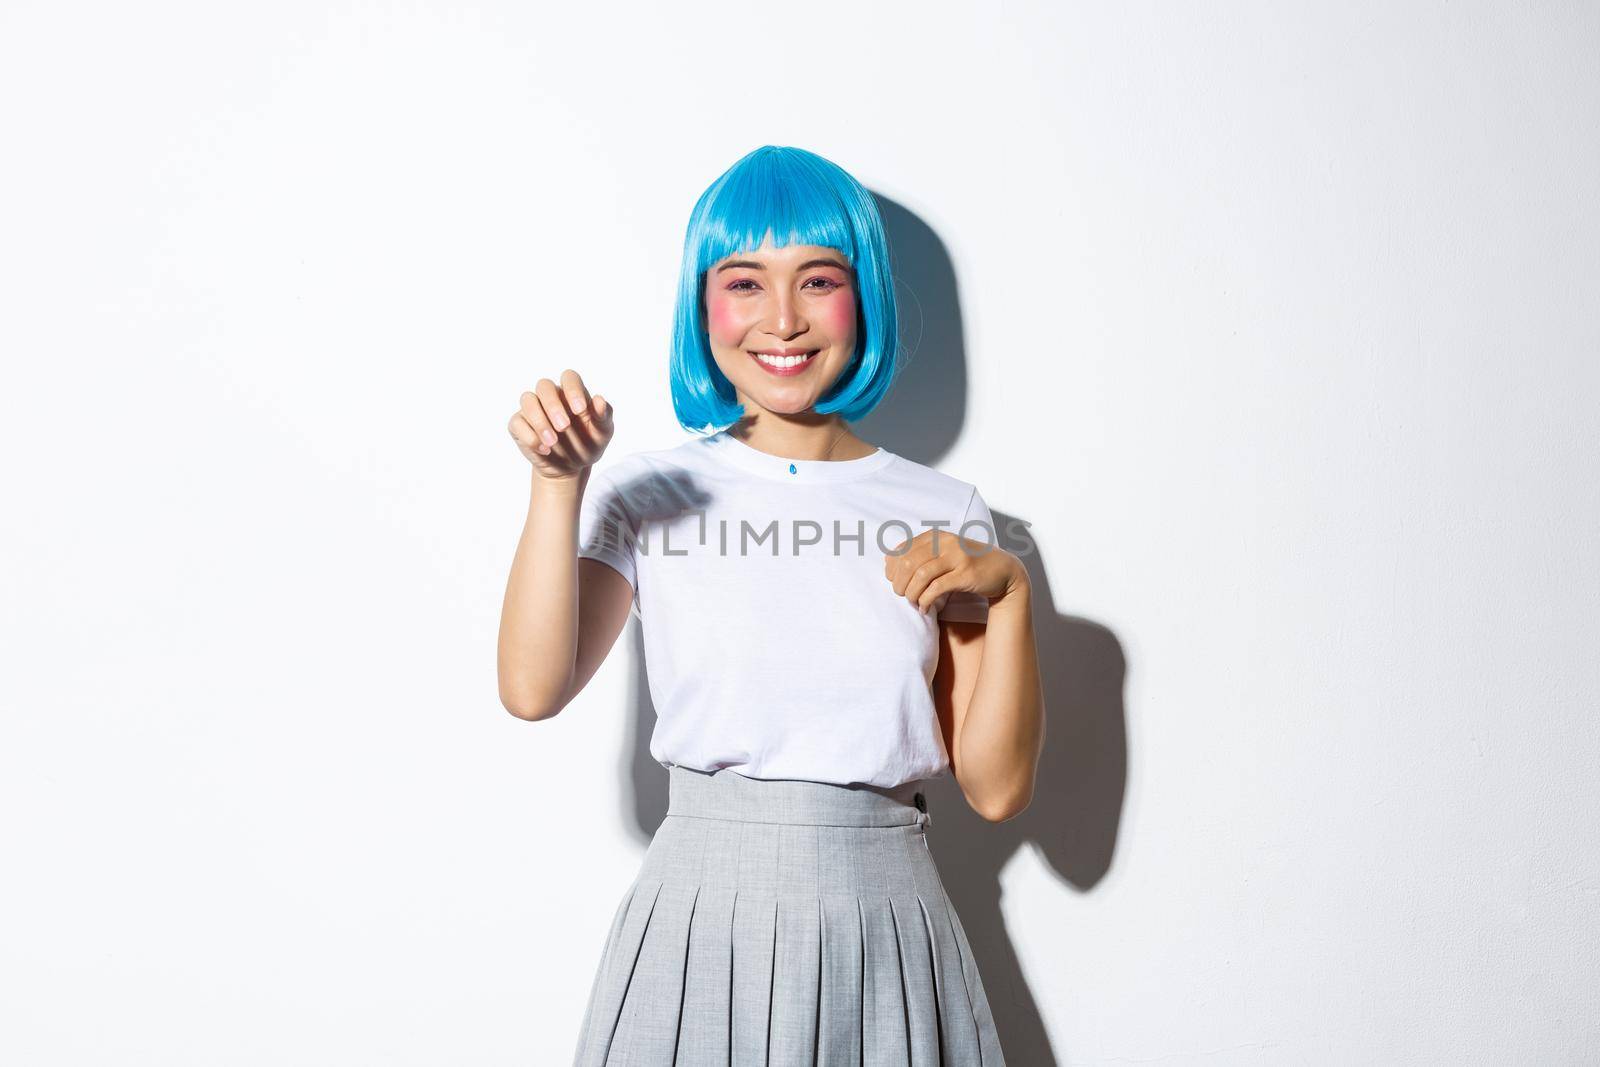 Portrait of funny and cute korean girl in blue wig celebrating halloween, waving hand like a paw, standing over white background.